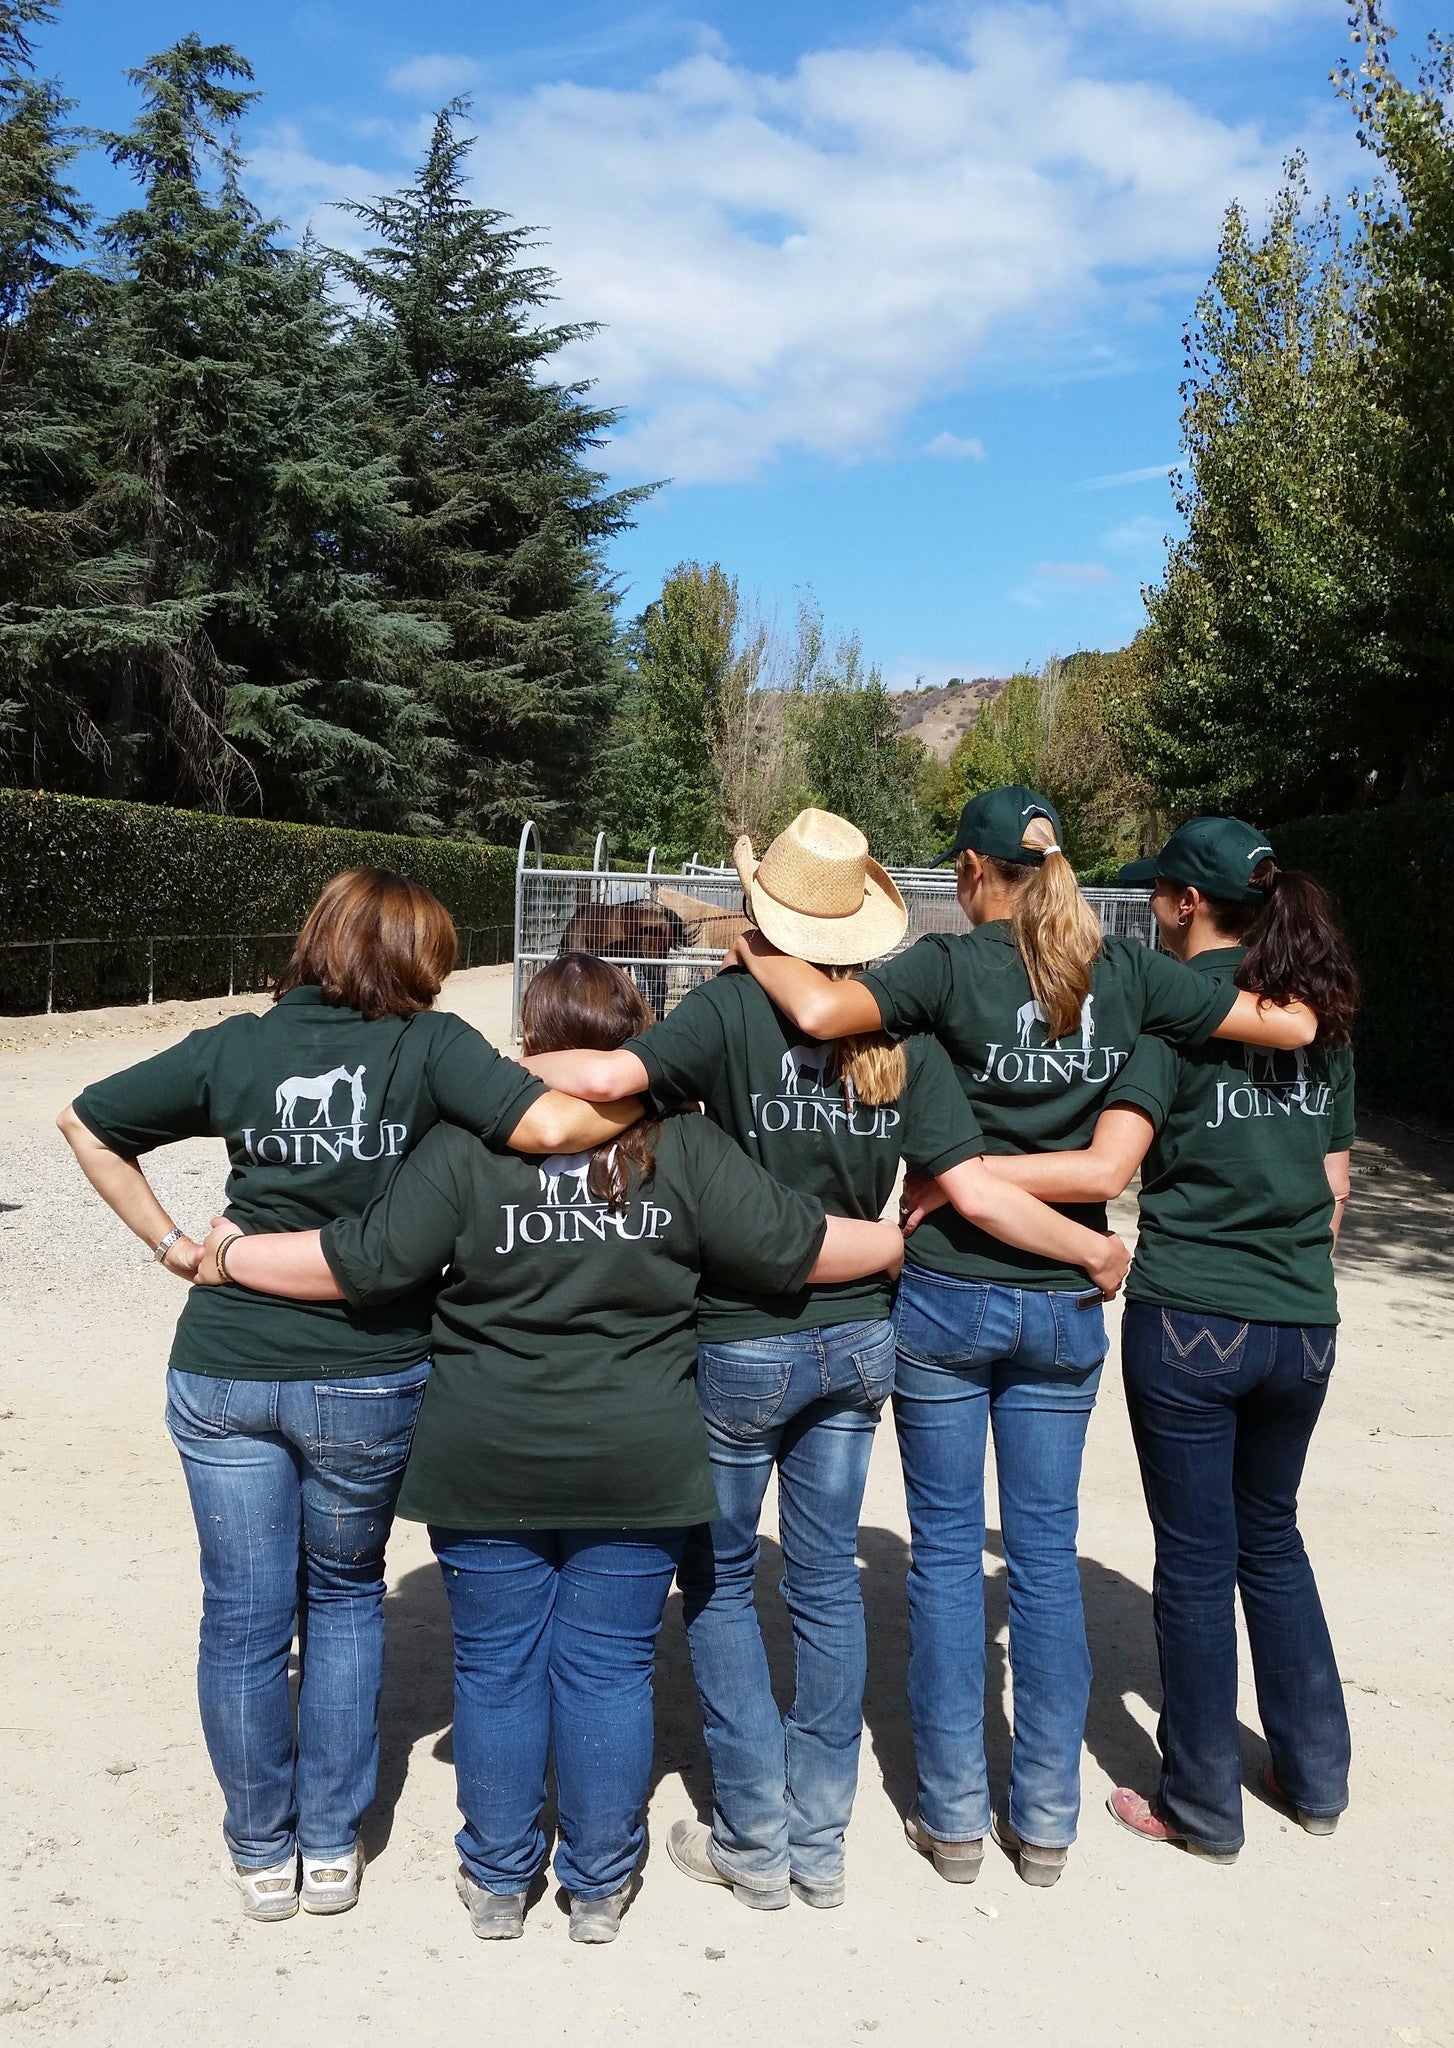 COURSES: INTRODUCTORY COURSE OF HORSEMANSHIP EXAMS: (5 DAYS)